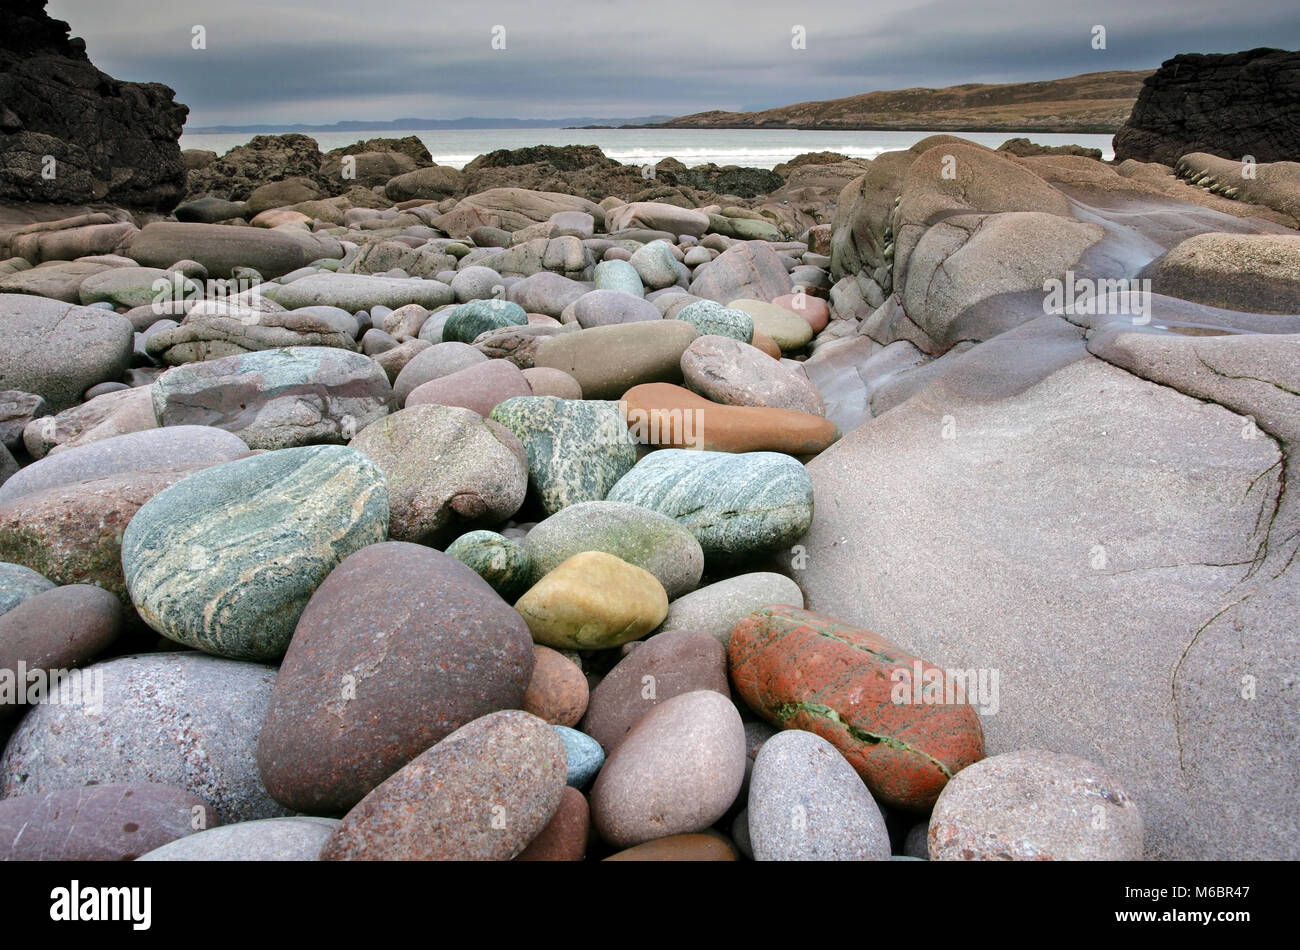 A view of the colorful rocks of Achnahaird Bay on the west coast of Scotland. Stock Photo